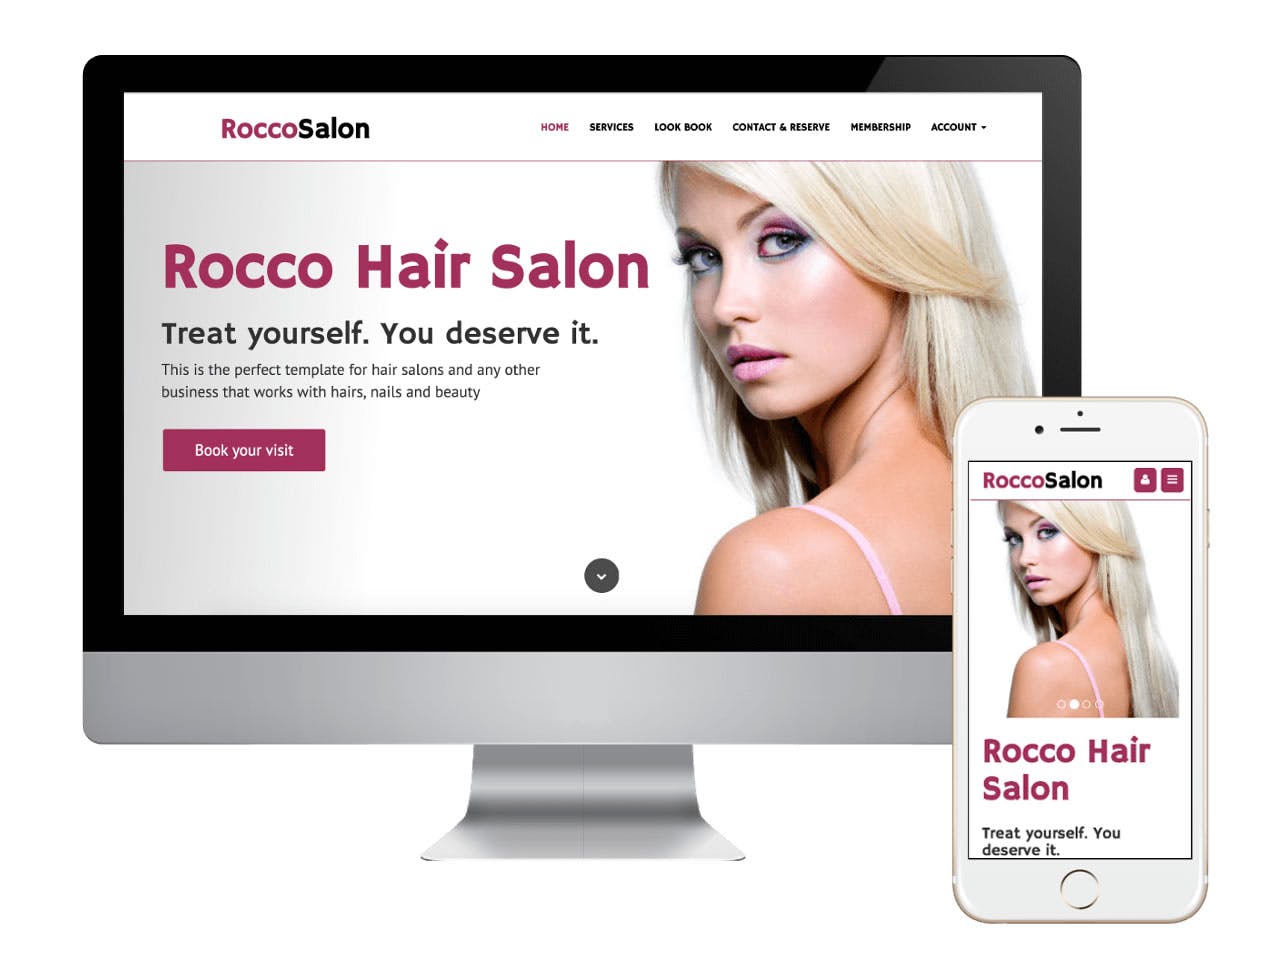 An awesome template if for hair salons looking for a fast loading but beautiful salon website theme.